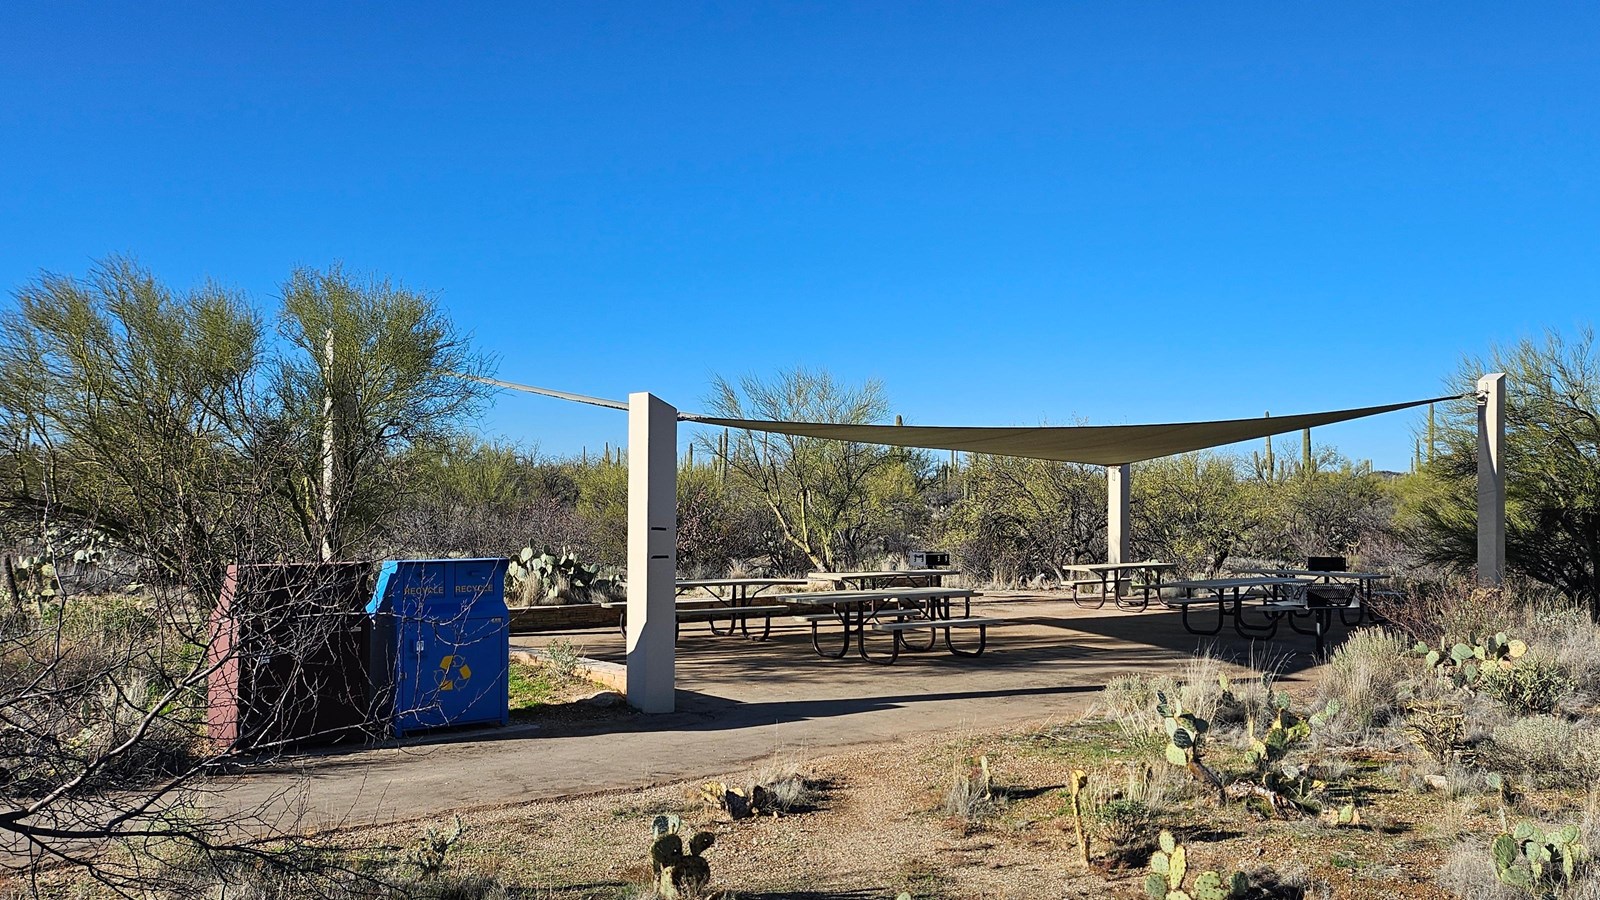 A large triangular shade structure covers six metal picnic tables. Two trash cans left of tables